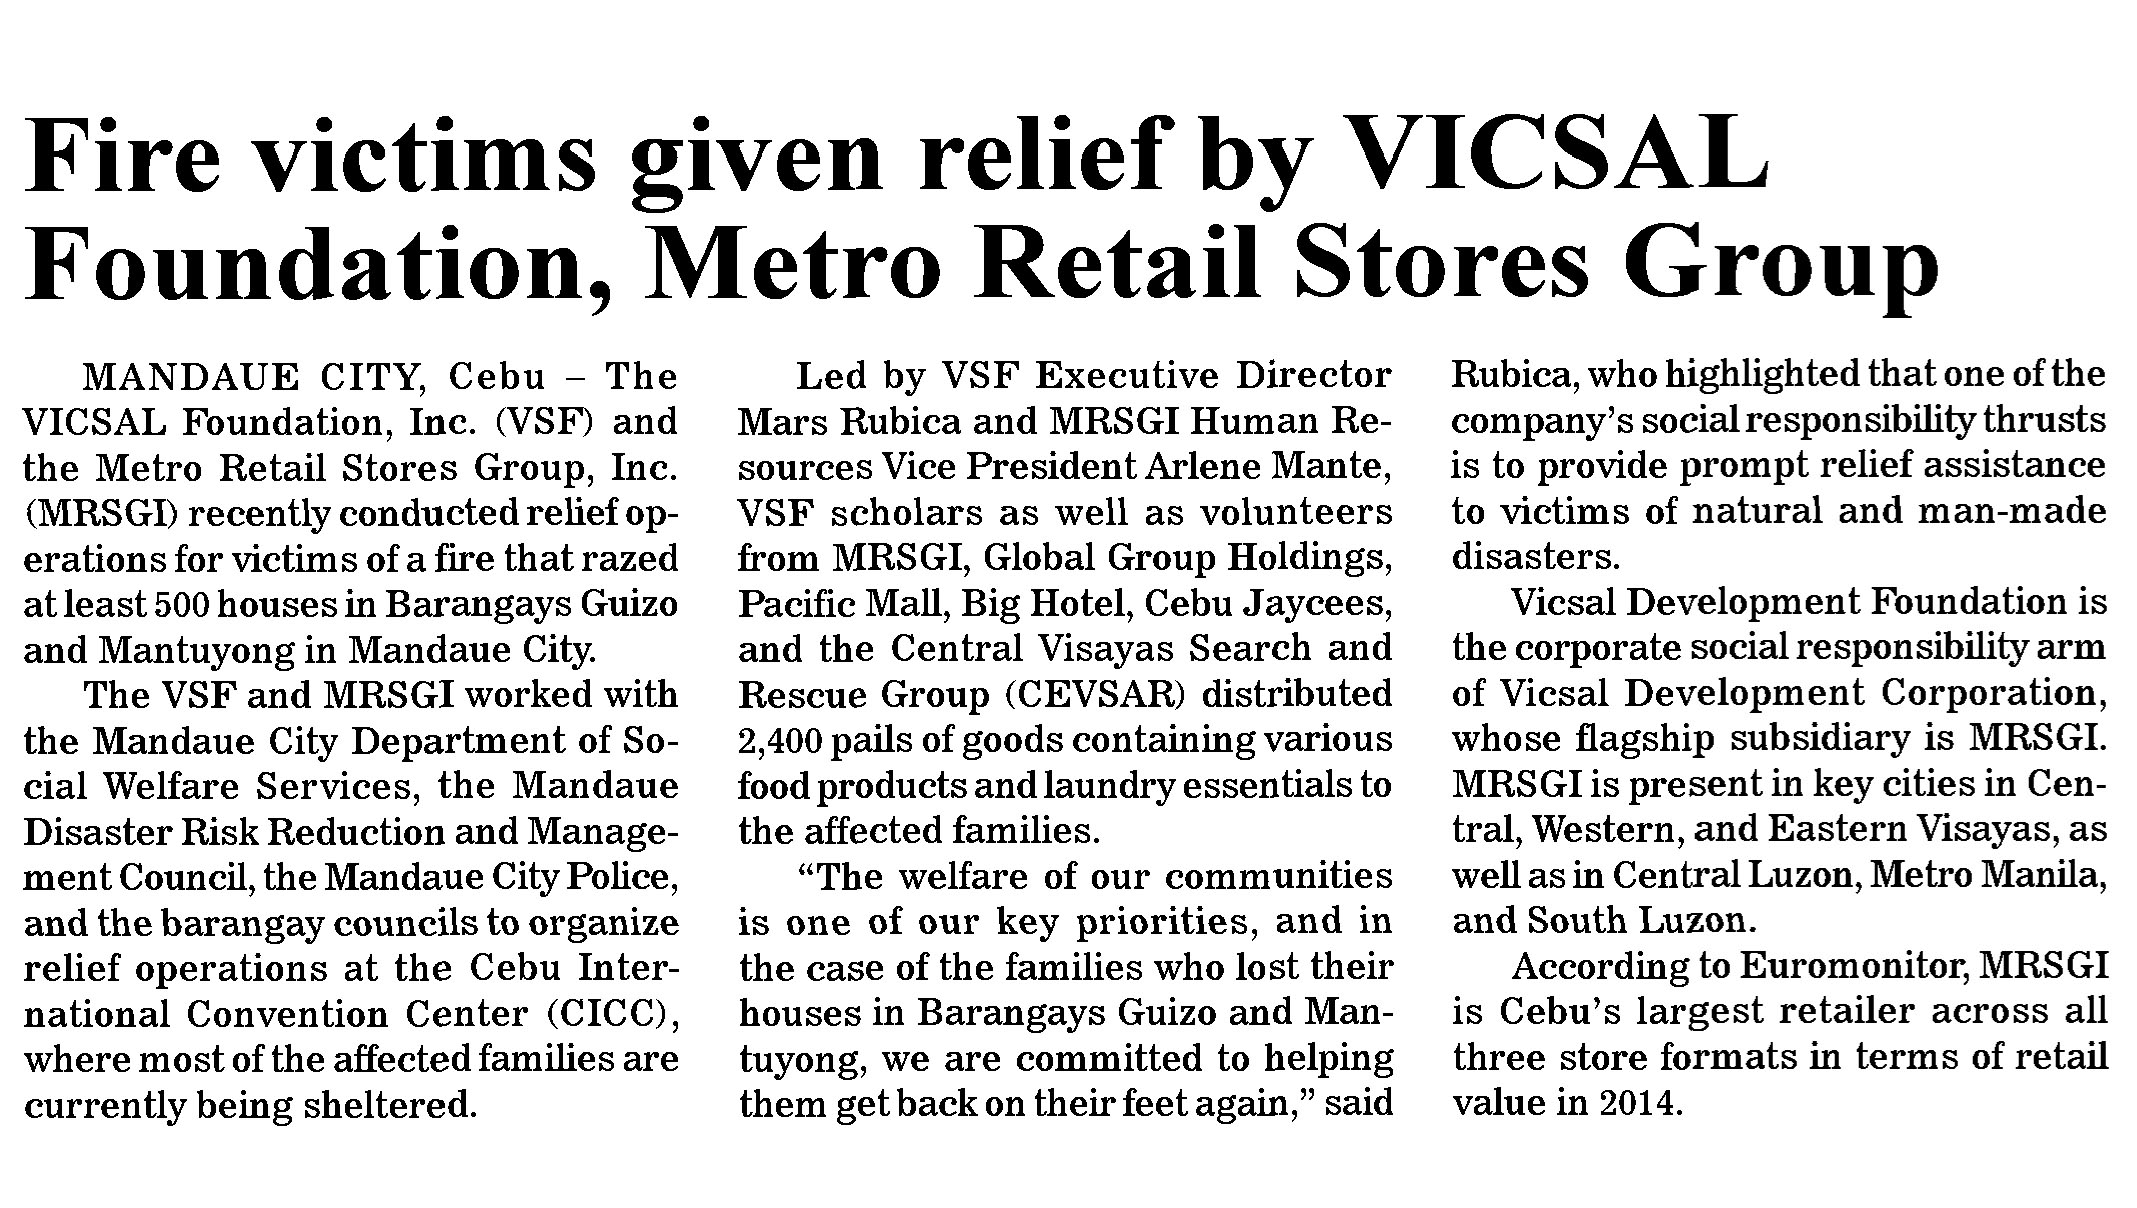 Fire victims given relief by VICSAL Foundation Metro Retail Stores Group